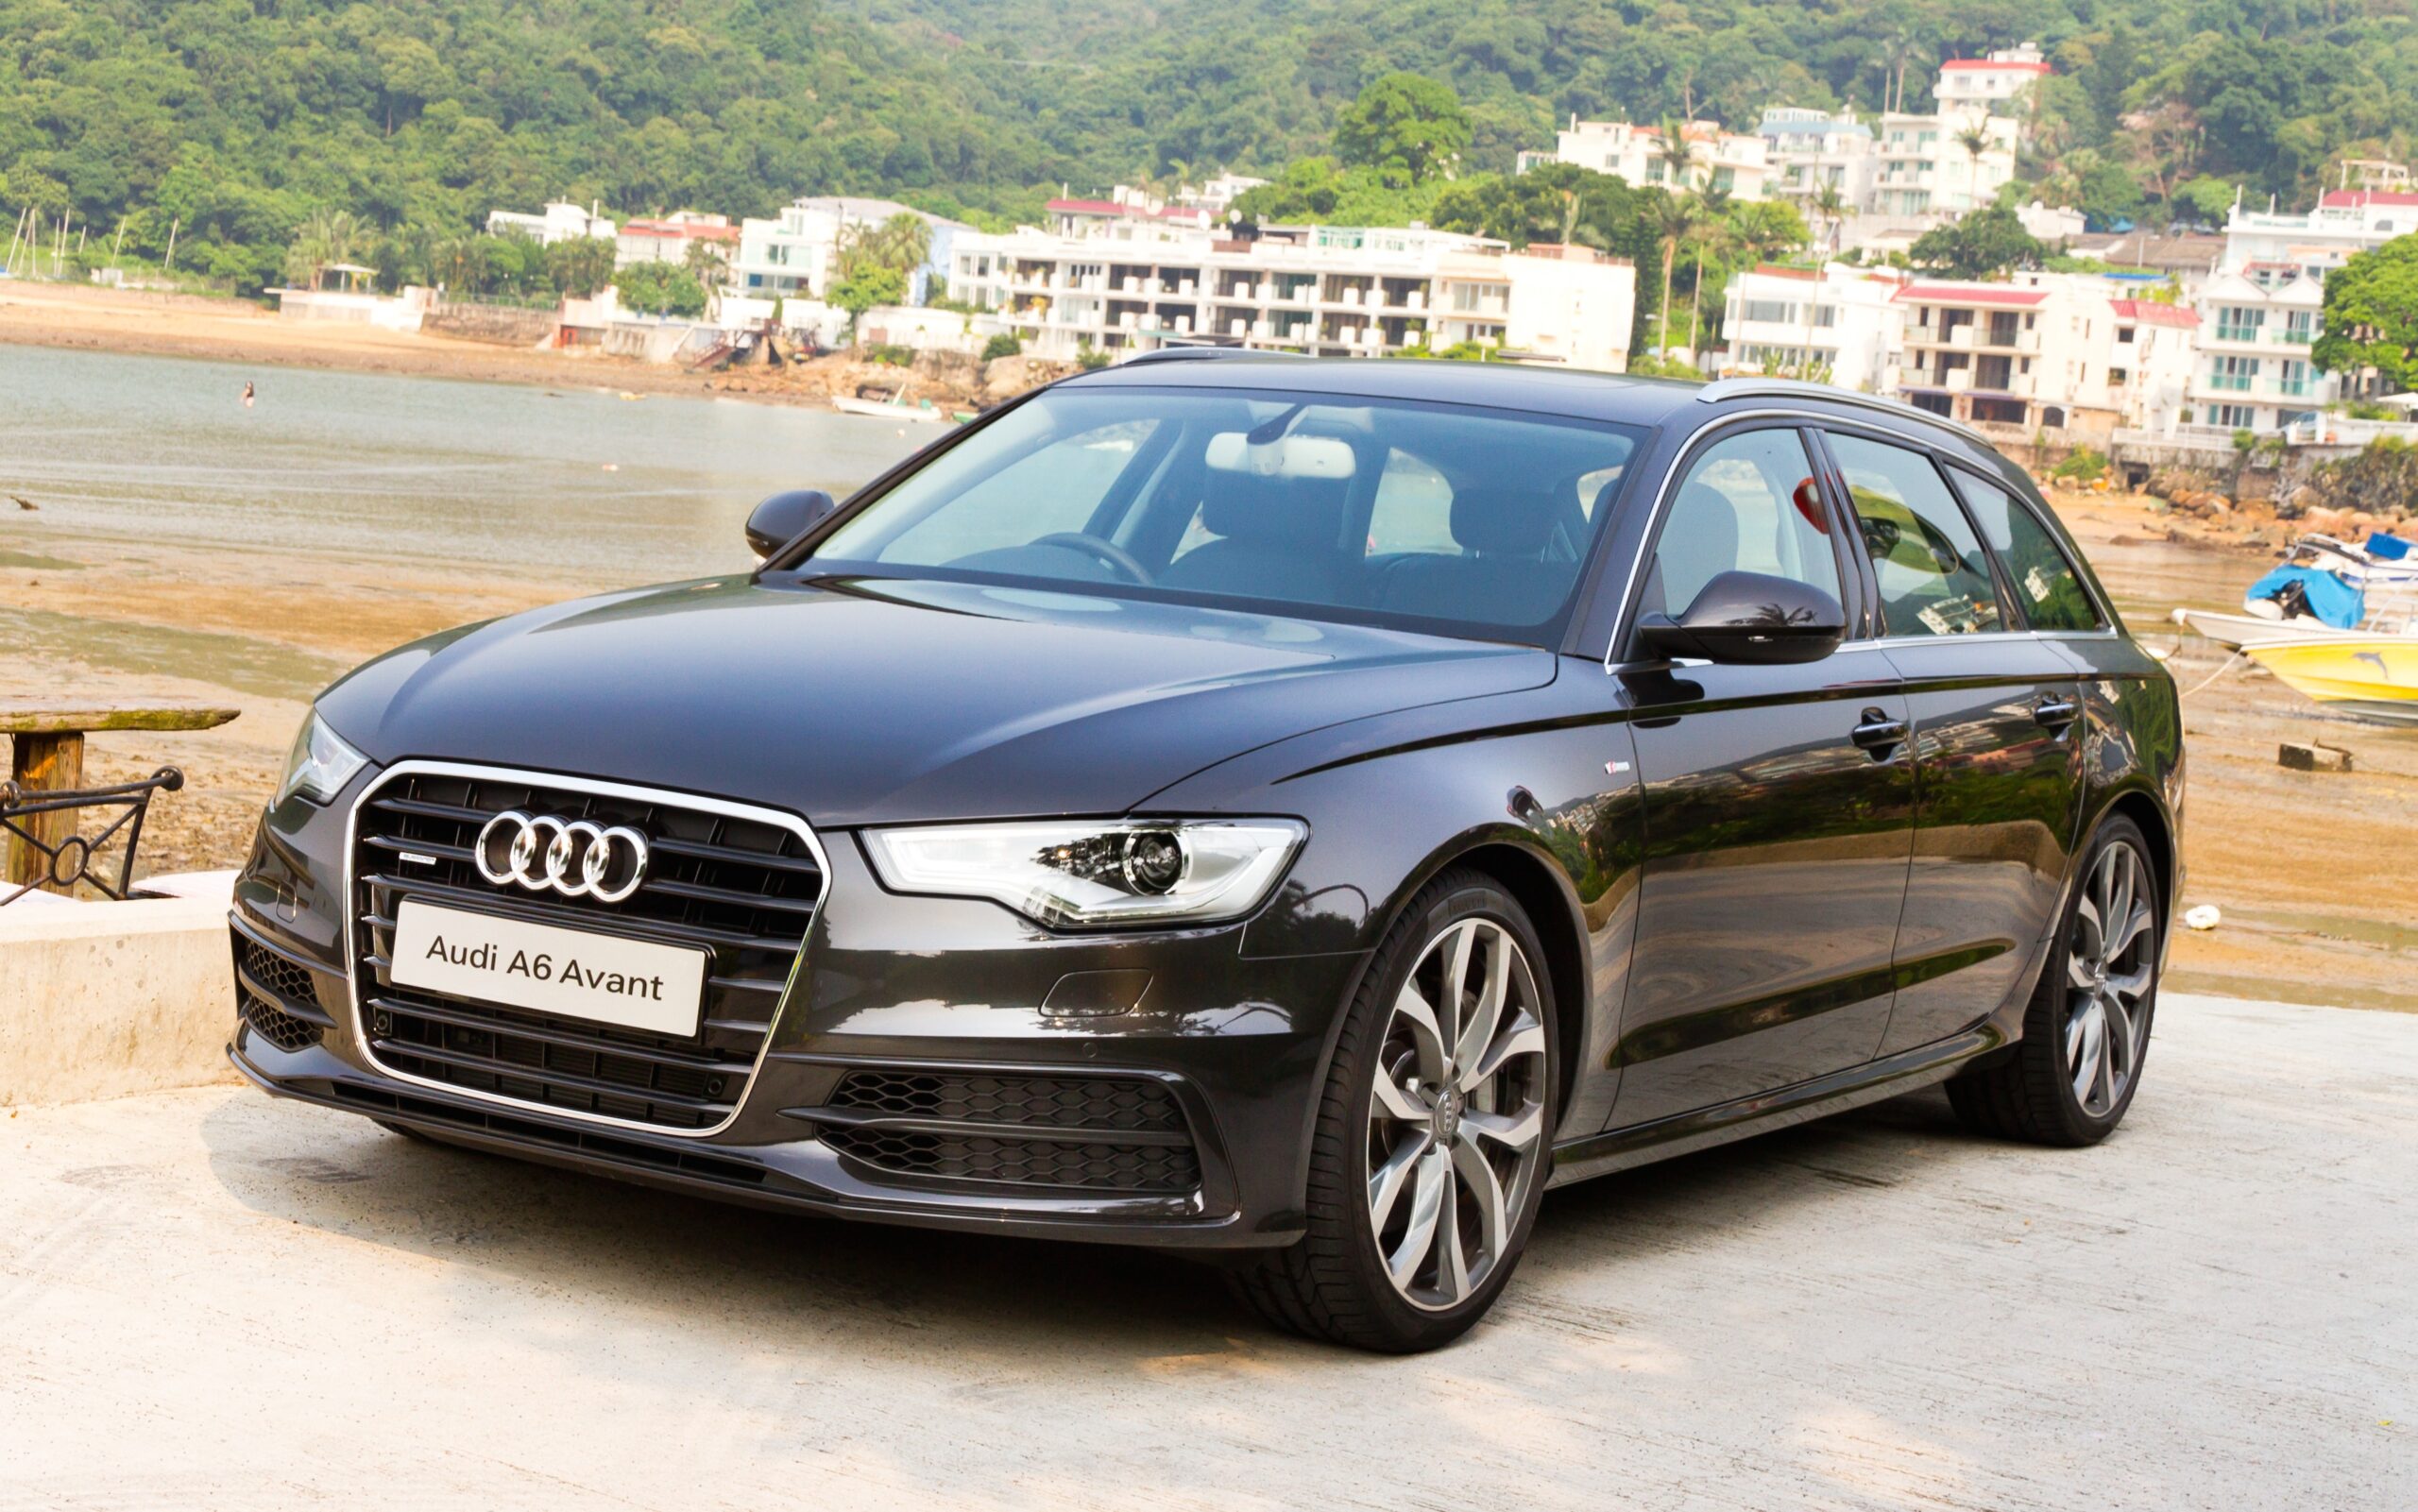 Audi A6 2012 Review| Feature and Specification